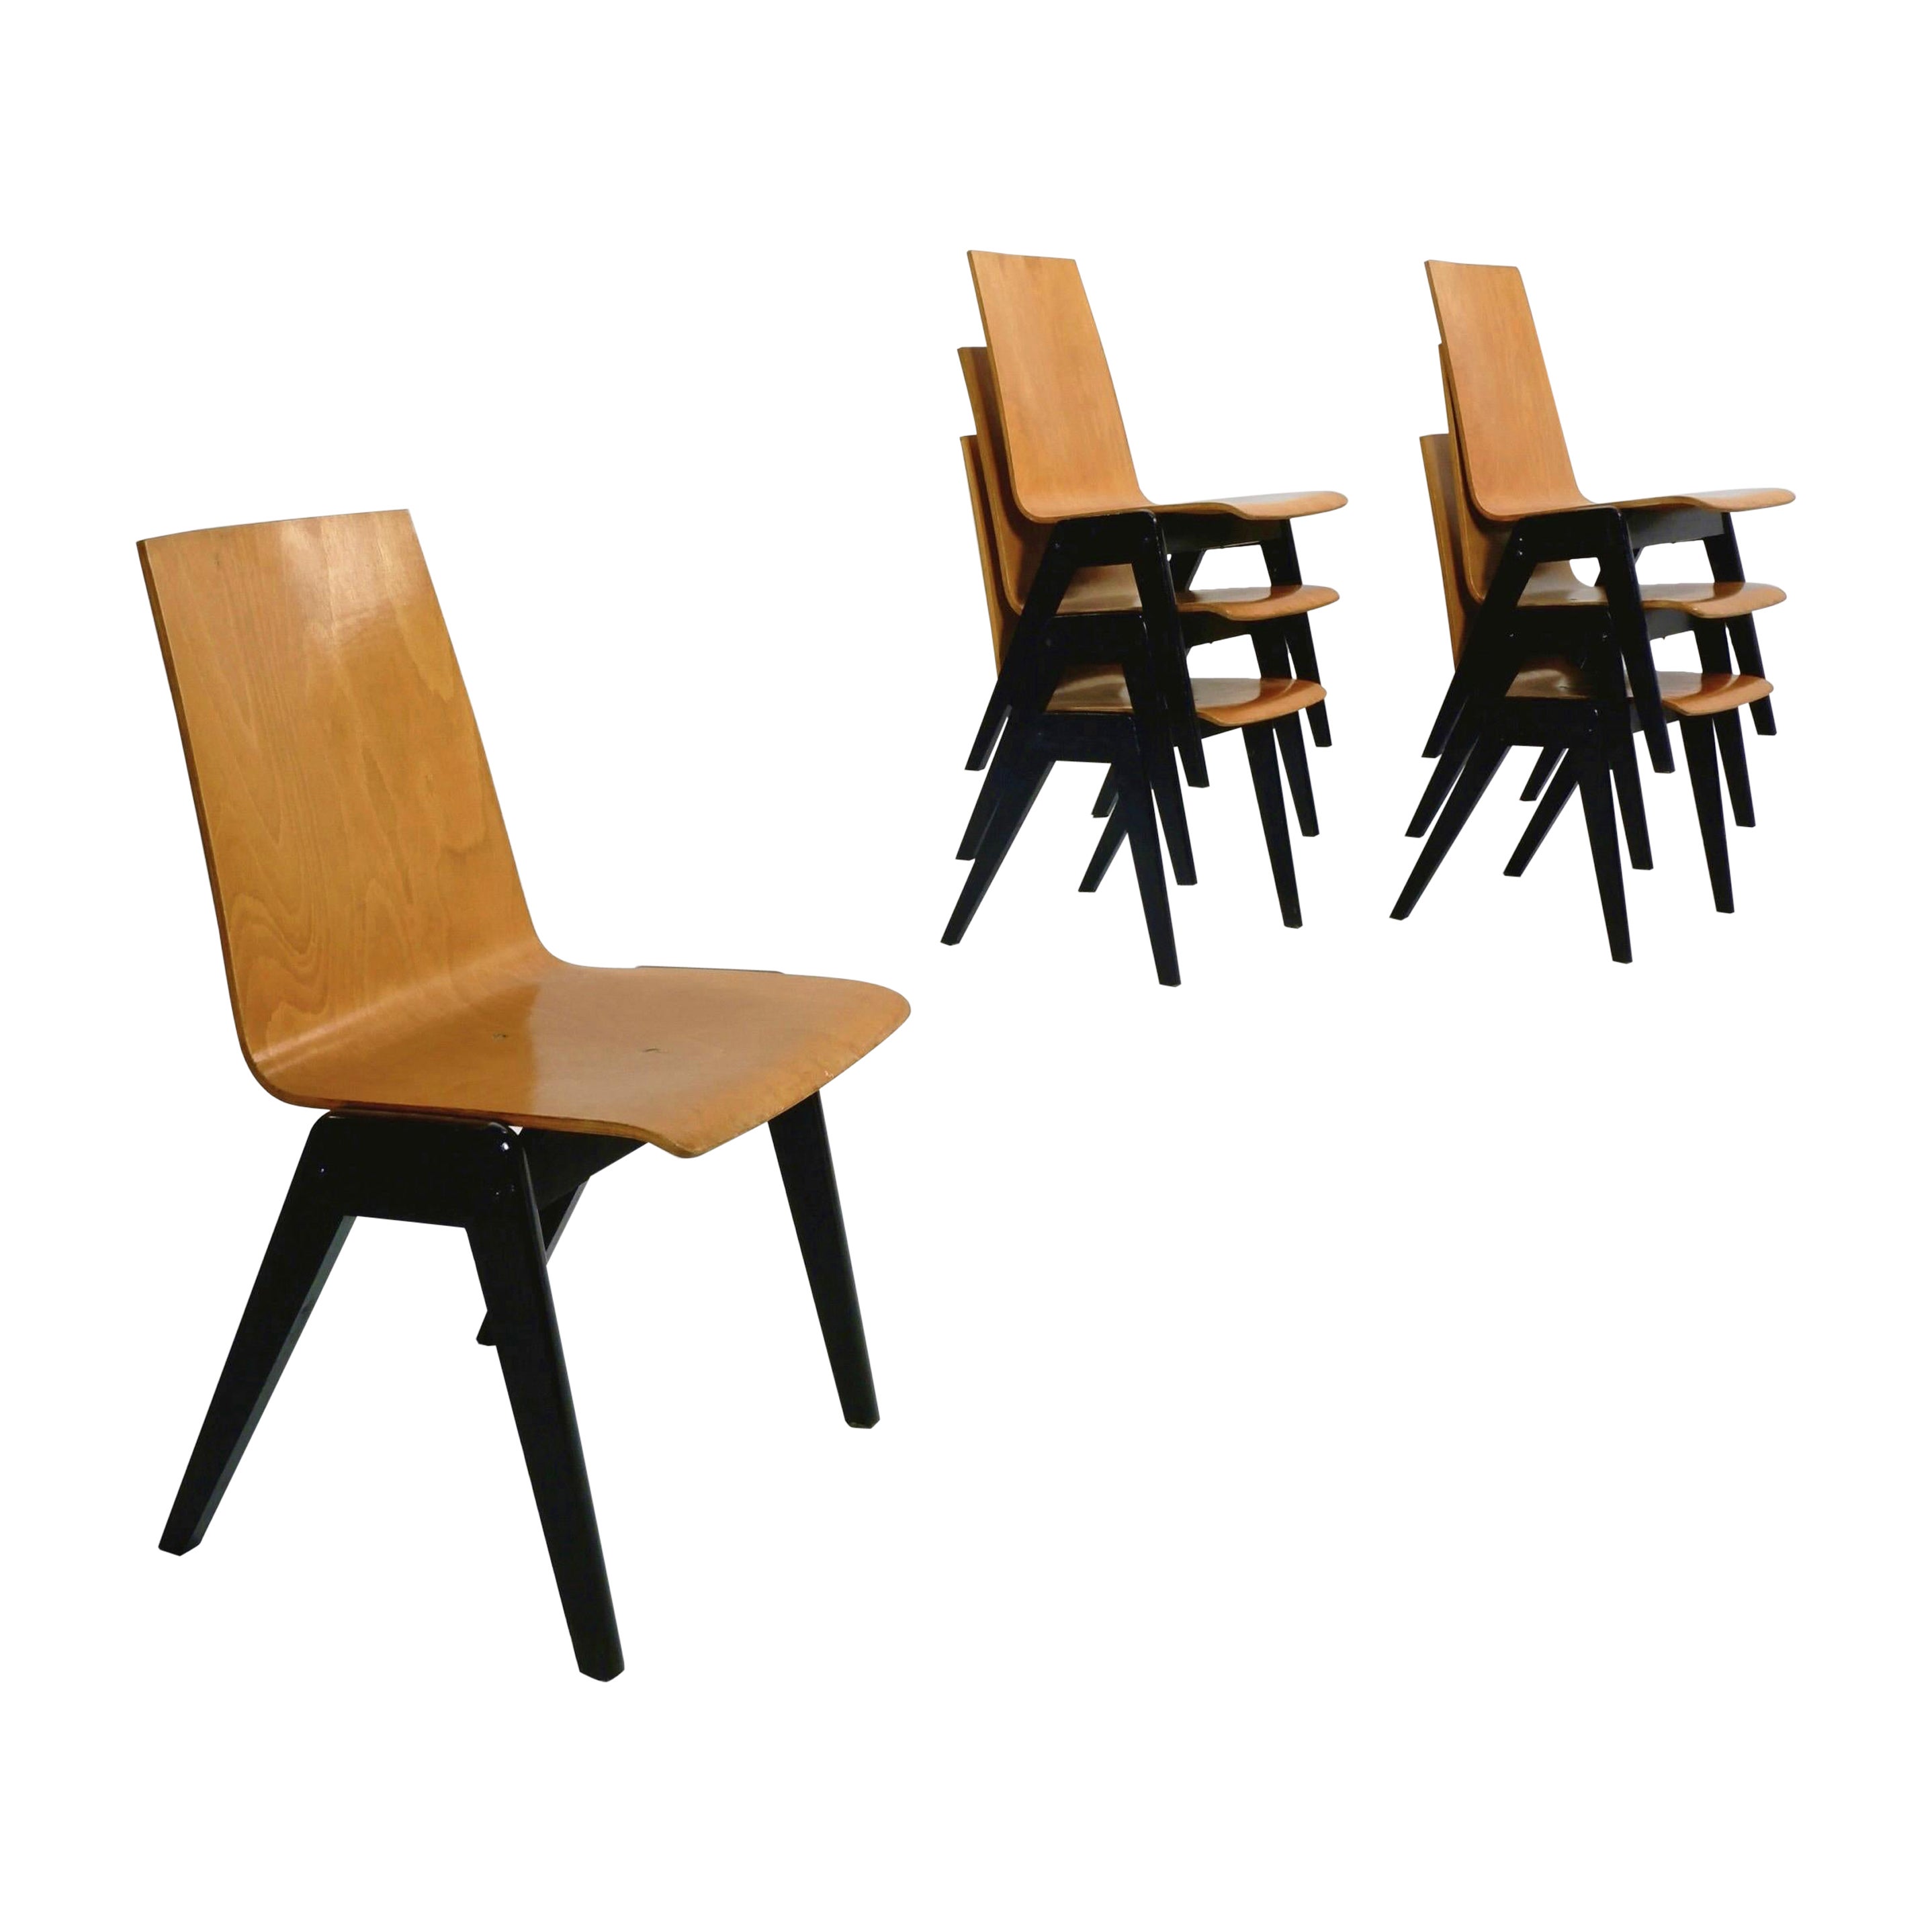 Plywood Stacking Chairs attrb. Roland Rainer, c.1950 For Sale